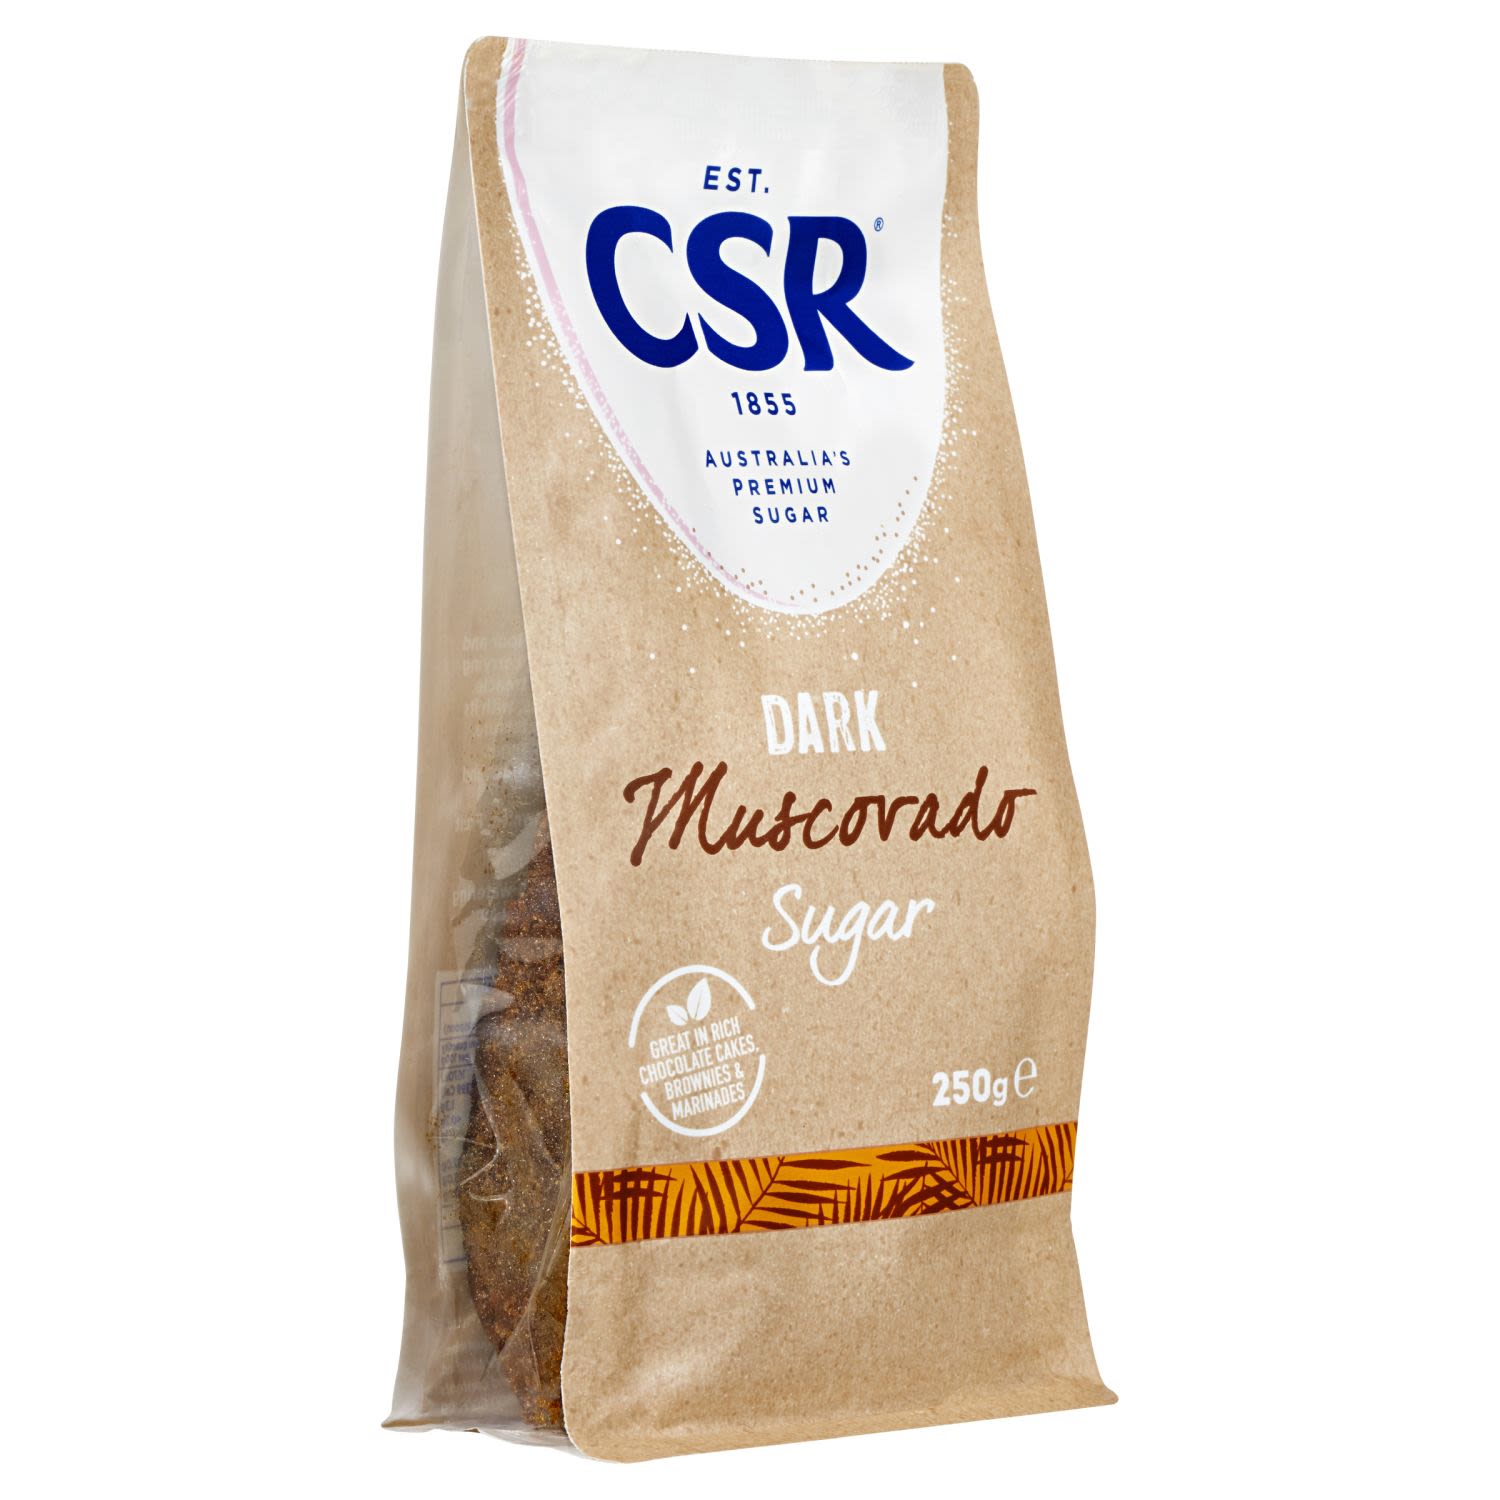 CSR Muscovado Sugar is known for it's dark colour and aroma and intensely decadent flavour. Crafted with rich molasses which help to keep your cakes moist and dense, this is a must-have for baking classic chocolate cakes or a tray of brownies. This sugar has a robust flavour which is also ideal for creating glazes and adding to BBQ marinades for a delicious mix of sweet and savoury taste in each bite.<br /> <br /> <br /><br />Country of Origin: Proudly Australian made